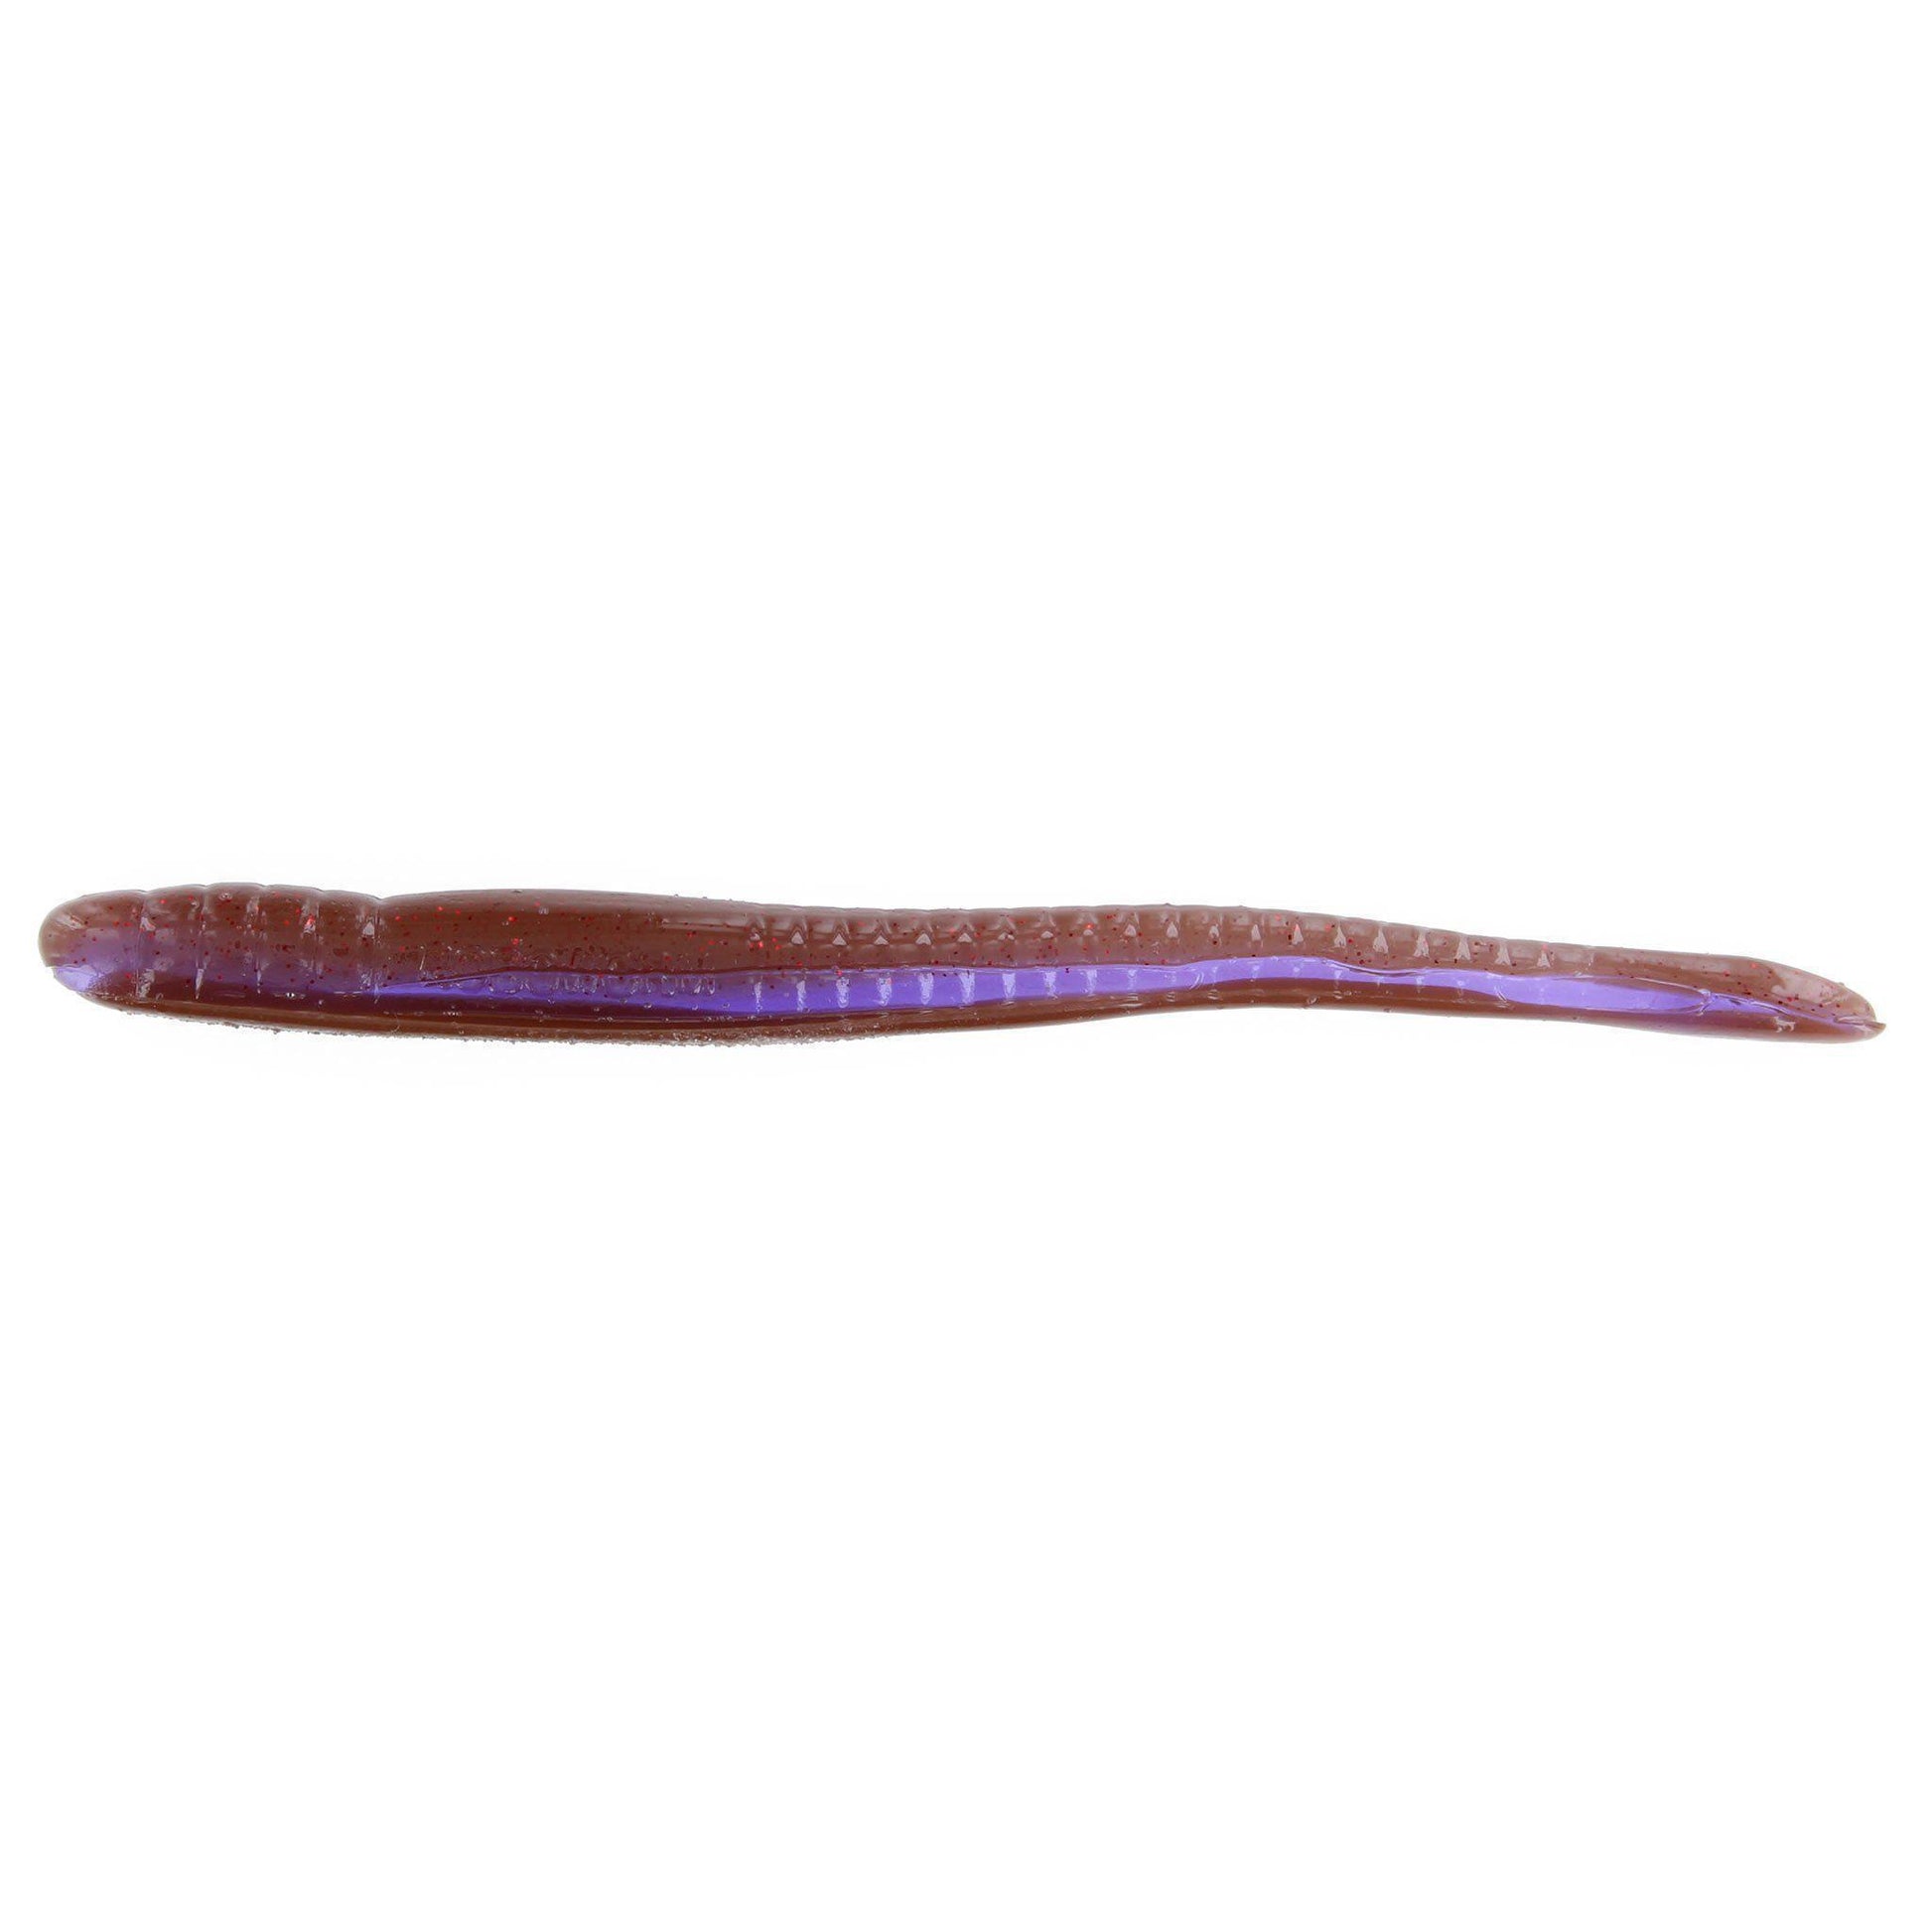 Roboworm Fat Straight Tail 6" Sf-A2Ar Oxblood Light/Red Flake 8Pk